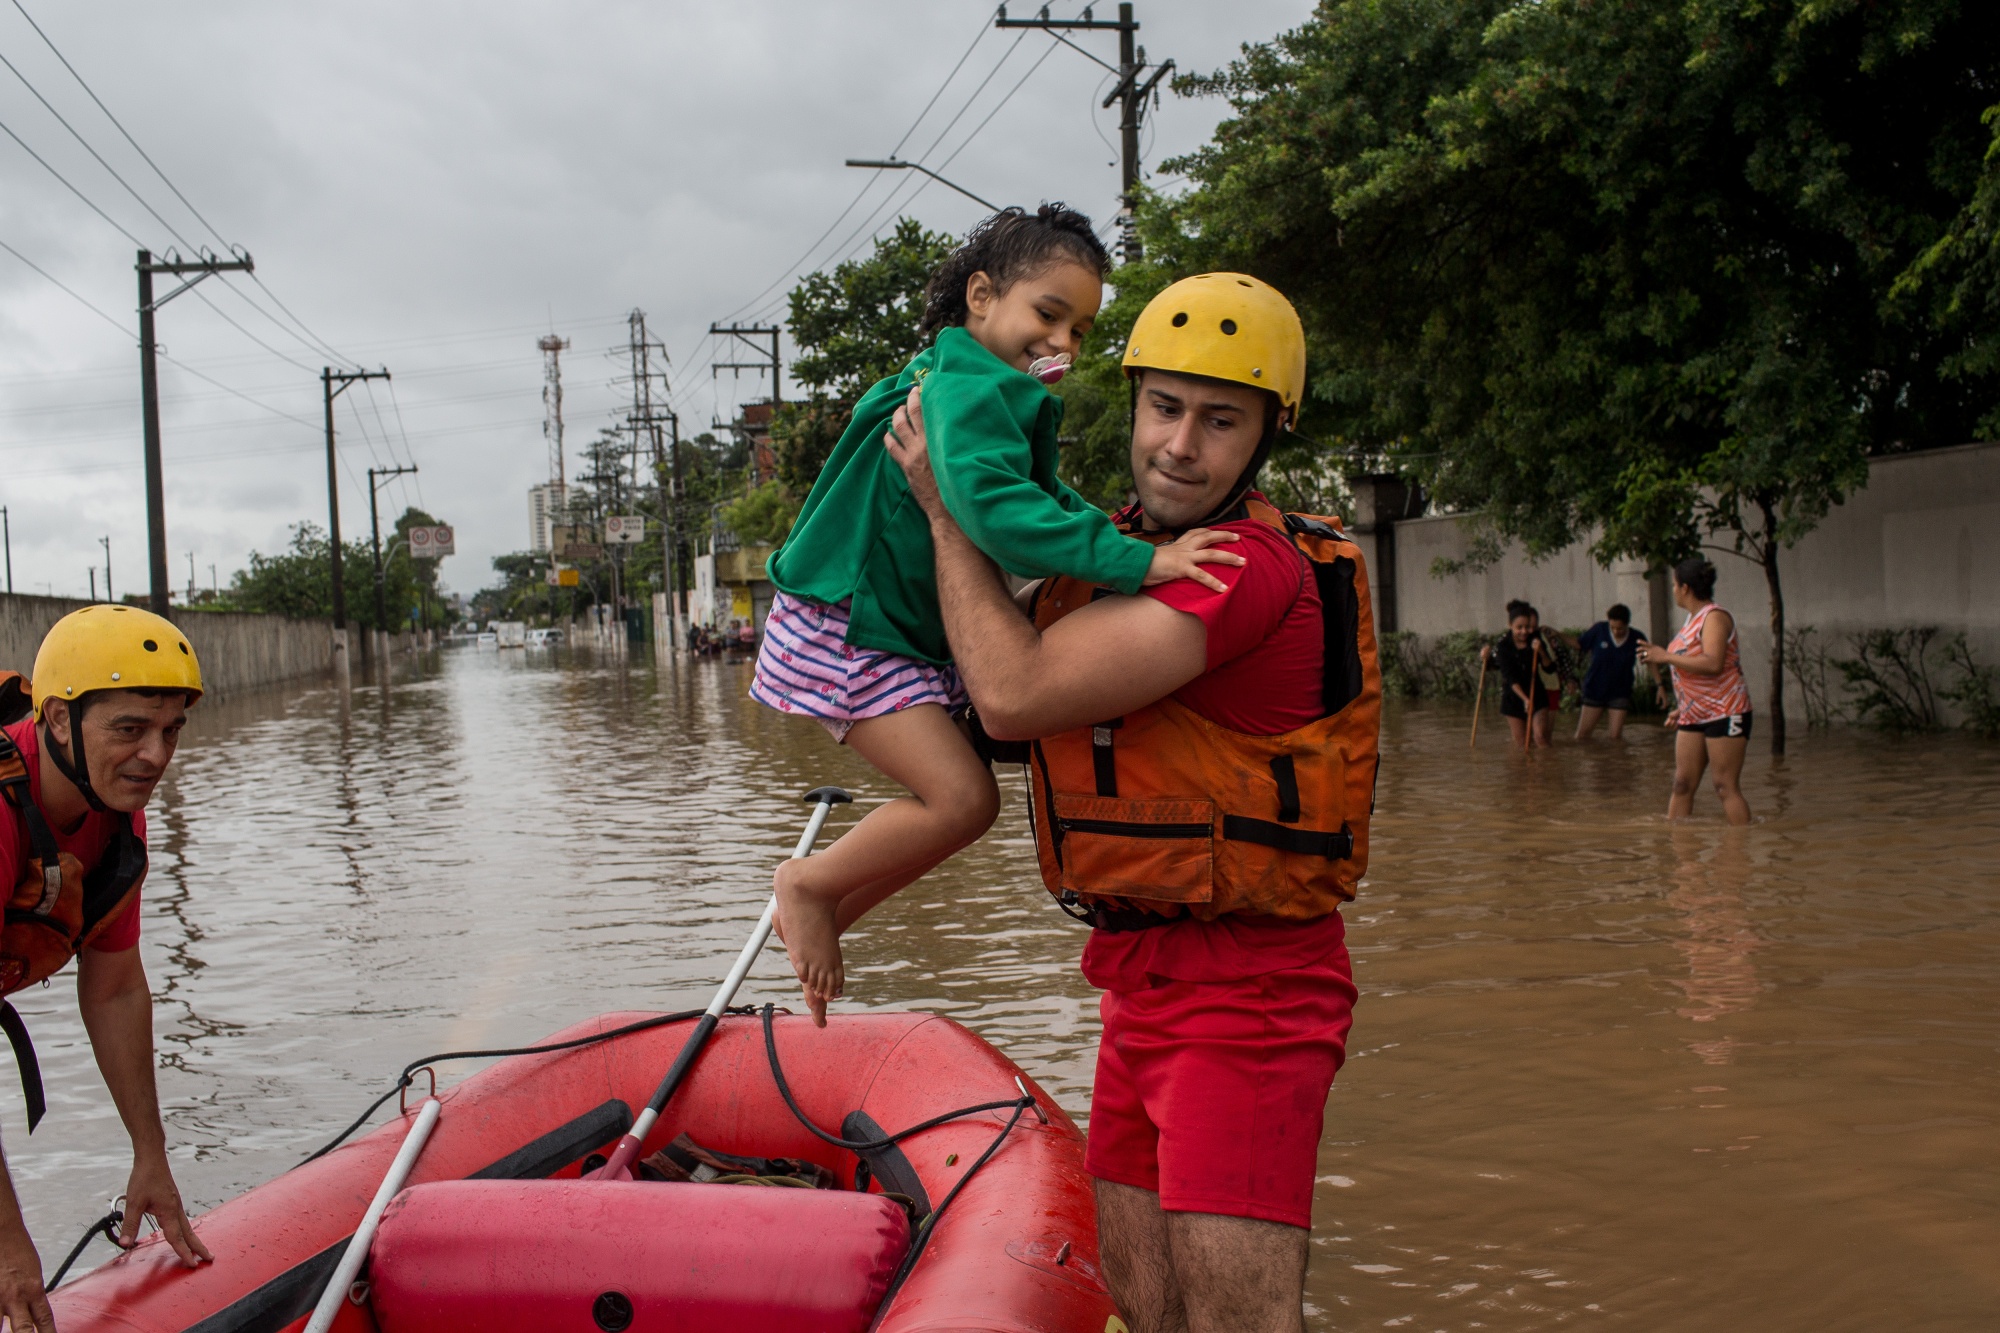 Chaos Descends on Sao Paulo as Rain Triggers Widespread Flooding